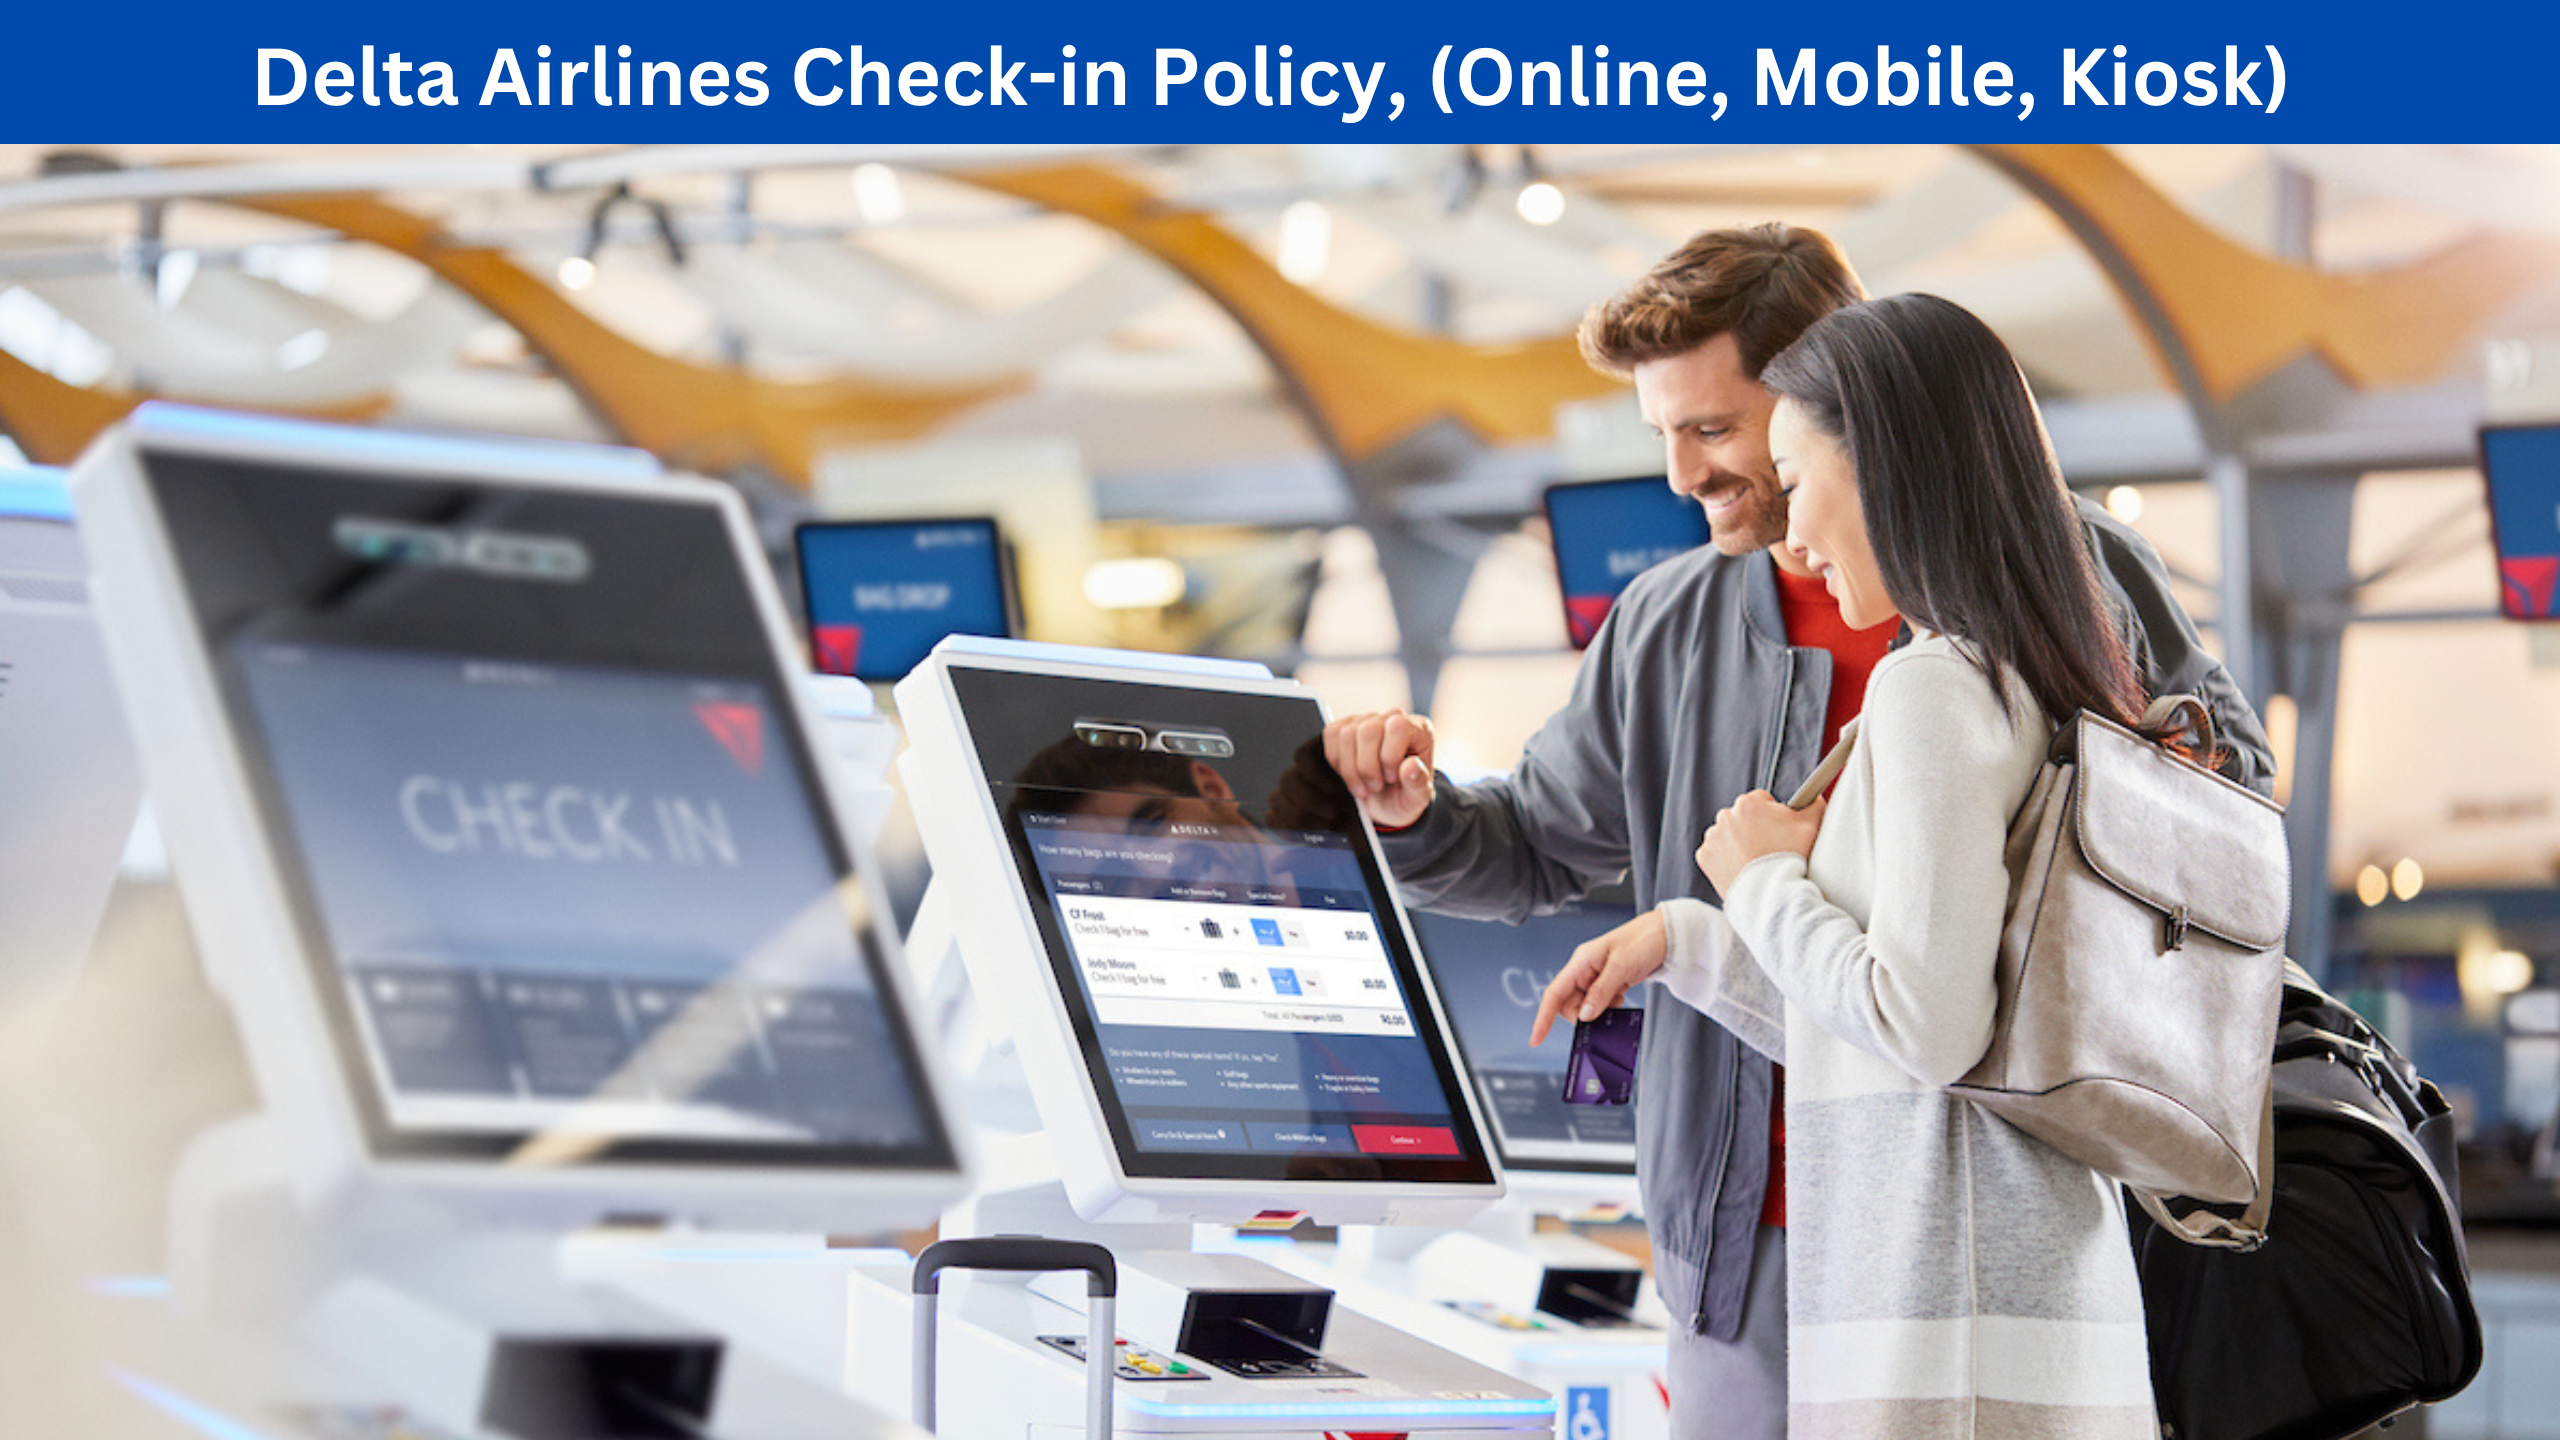 Delta Airlines Check-in